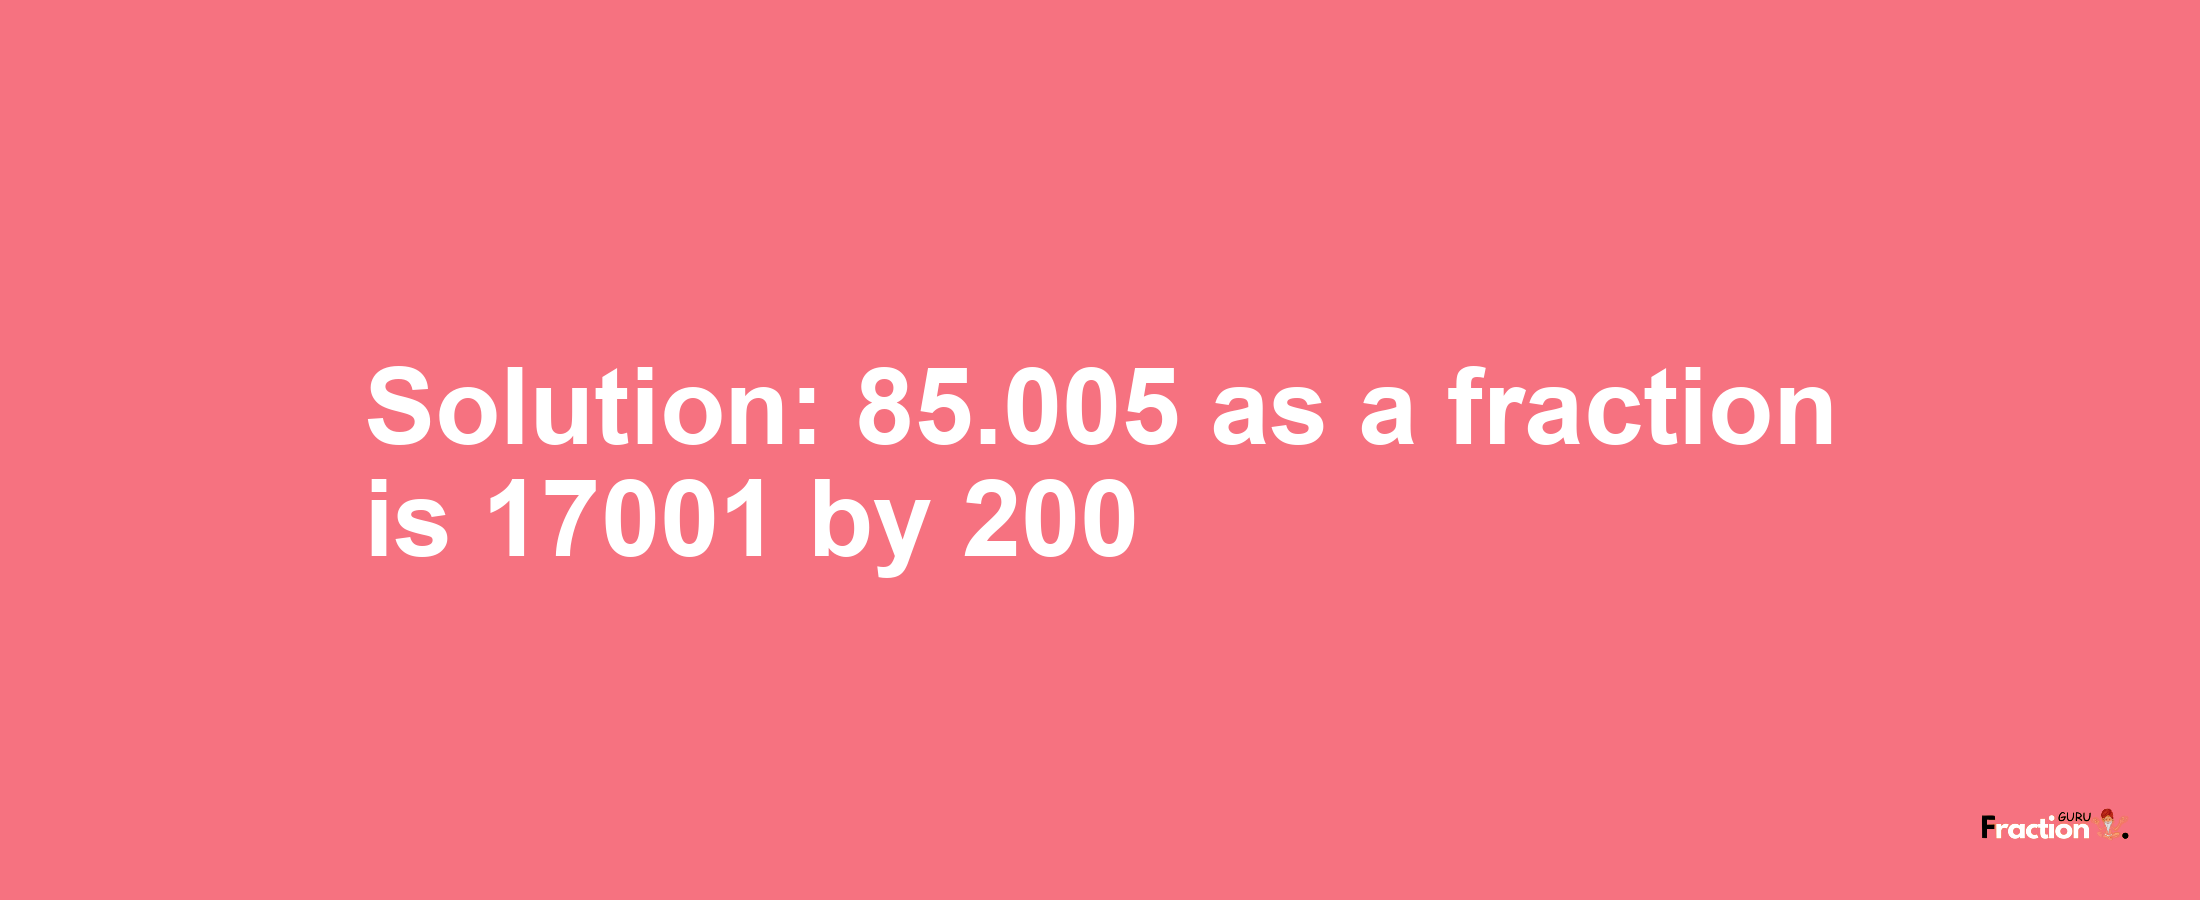 Solution:85.005 as a fraction is 17001/200